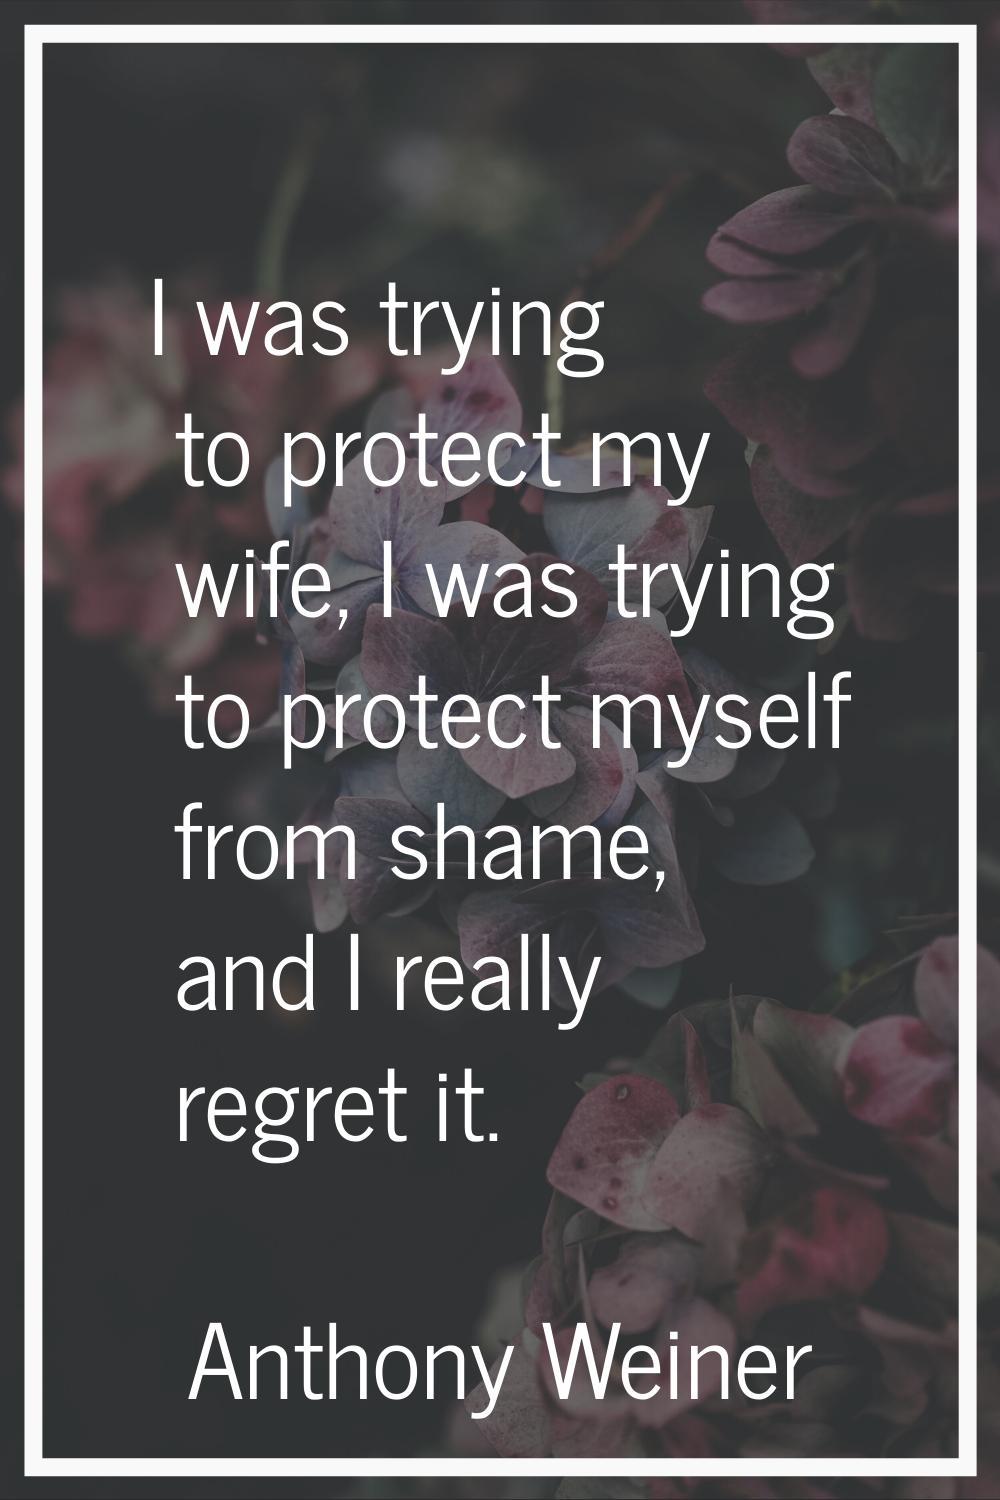 I was trying to protect my wife, I was trying to protect myself from shame, and I really regret it.